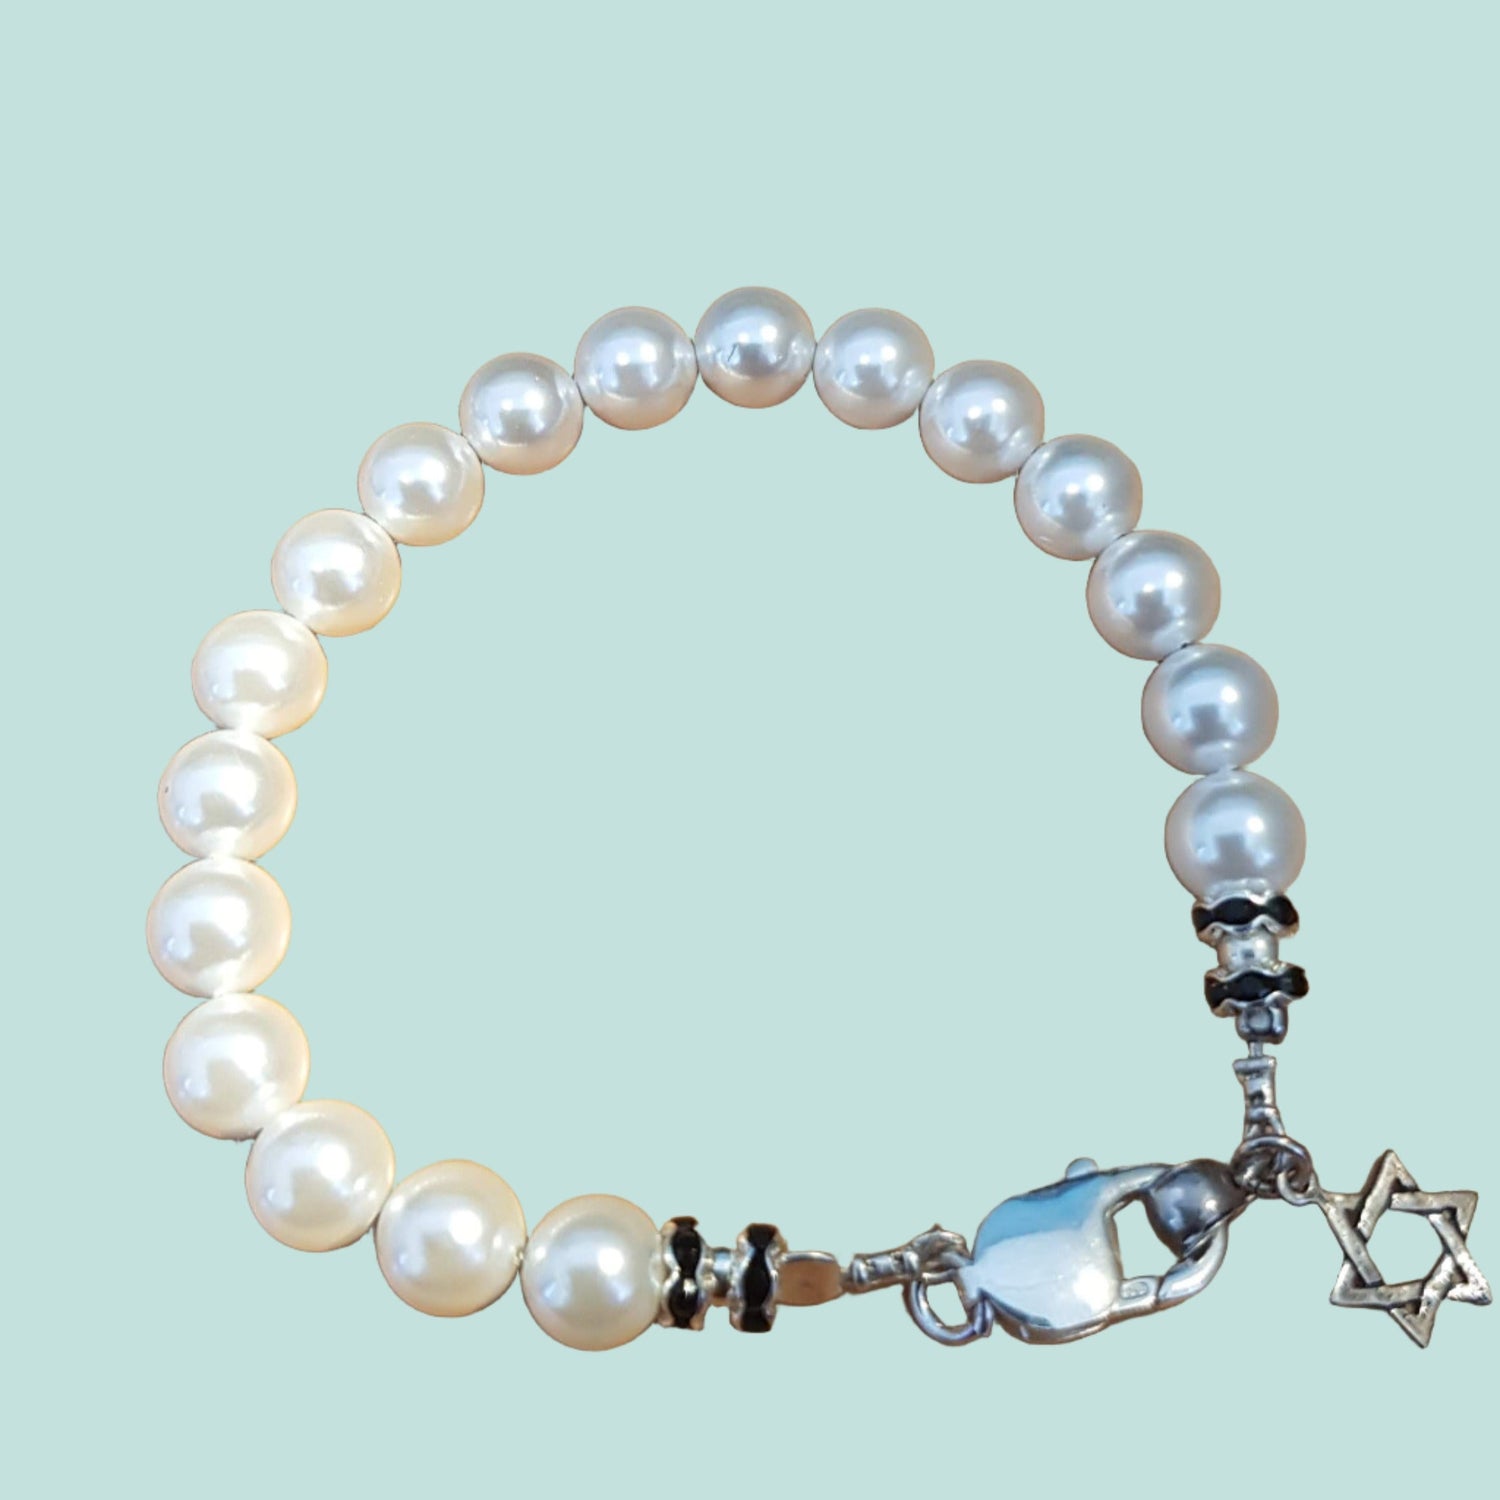 Bluenoemi Jewelry Bracelets white Pearls bracelet Star of David charm for peace protection & good luck